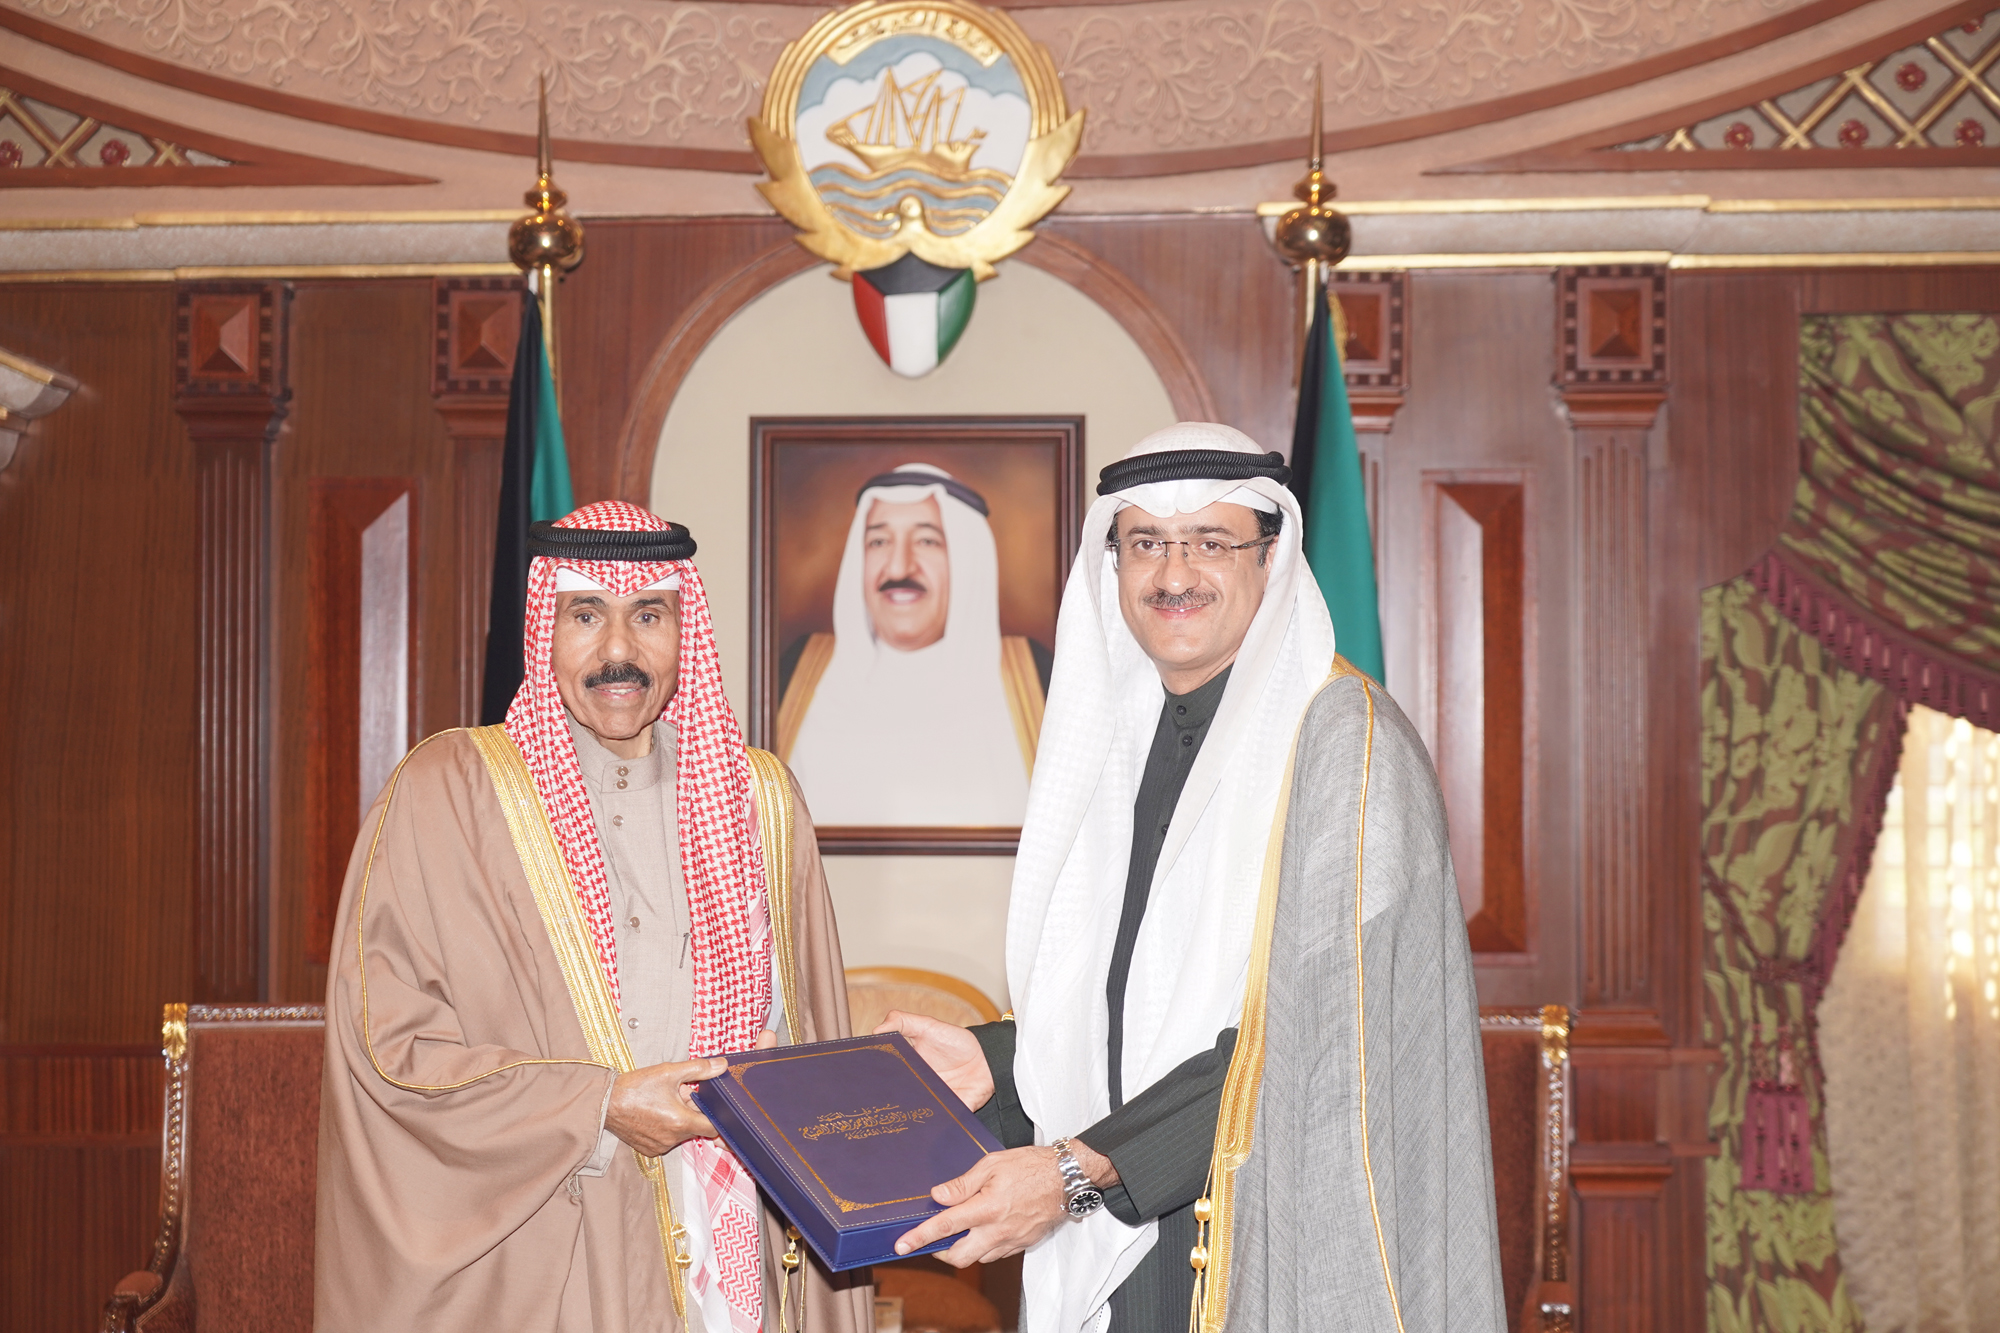 His Highness the Crown Prince Sheikh Nawaf Al-Ahmad Al-Jaber Al-Sabah receives Kuwait's Counsel General in Erbil Omar Al-Kanderi as he handed His Highness a book of Kuwait's humanitarian activities in Iraq since 2015